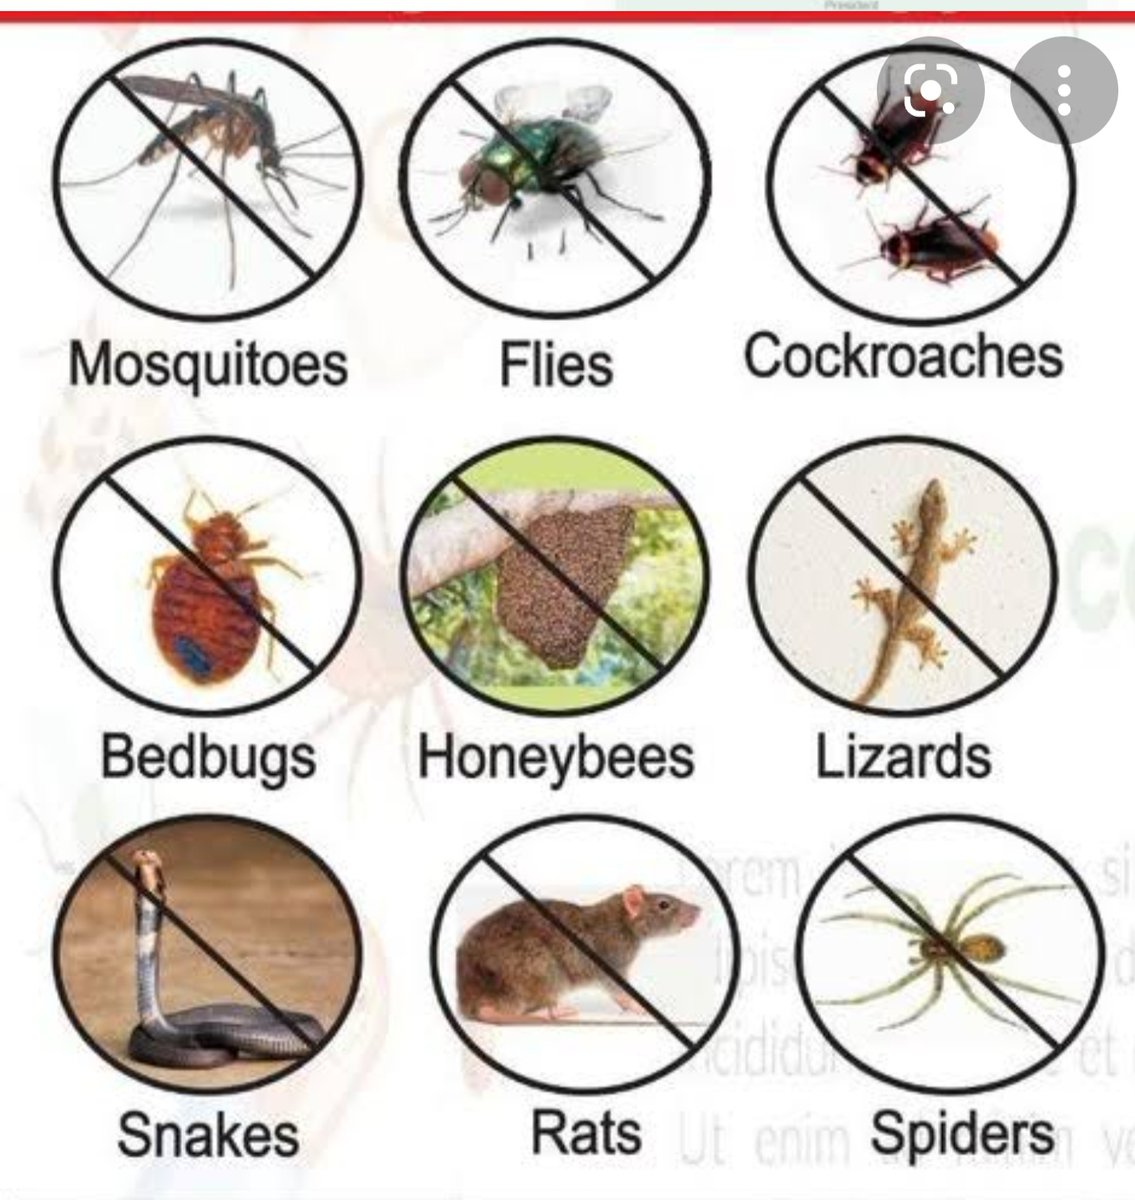 Say goodbye to pesky pests with our expert fumigation and pest control services in Rongai! Our customized solutions ensure a pest-free environment. Contact us today for effective and reliable pest management! #PestControl'
ellacleaning.co.ke/rongai/